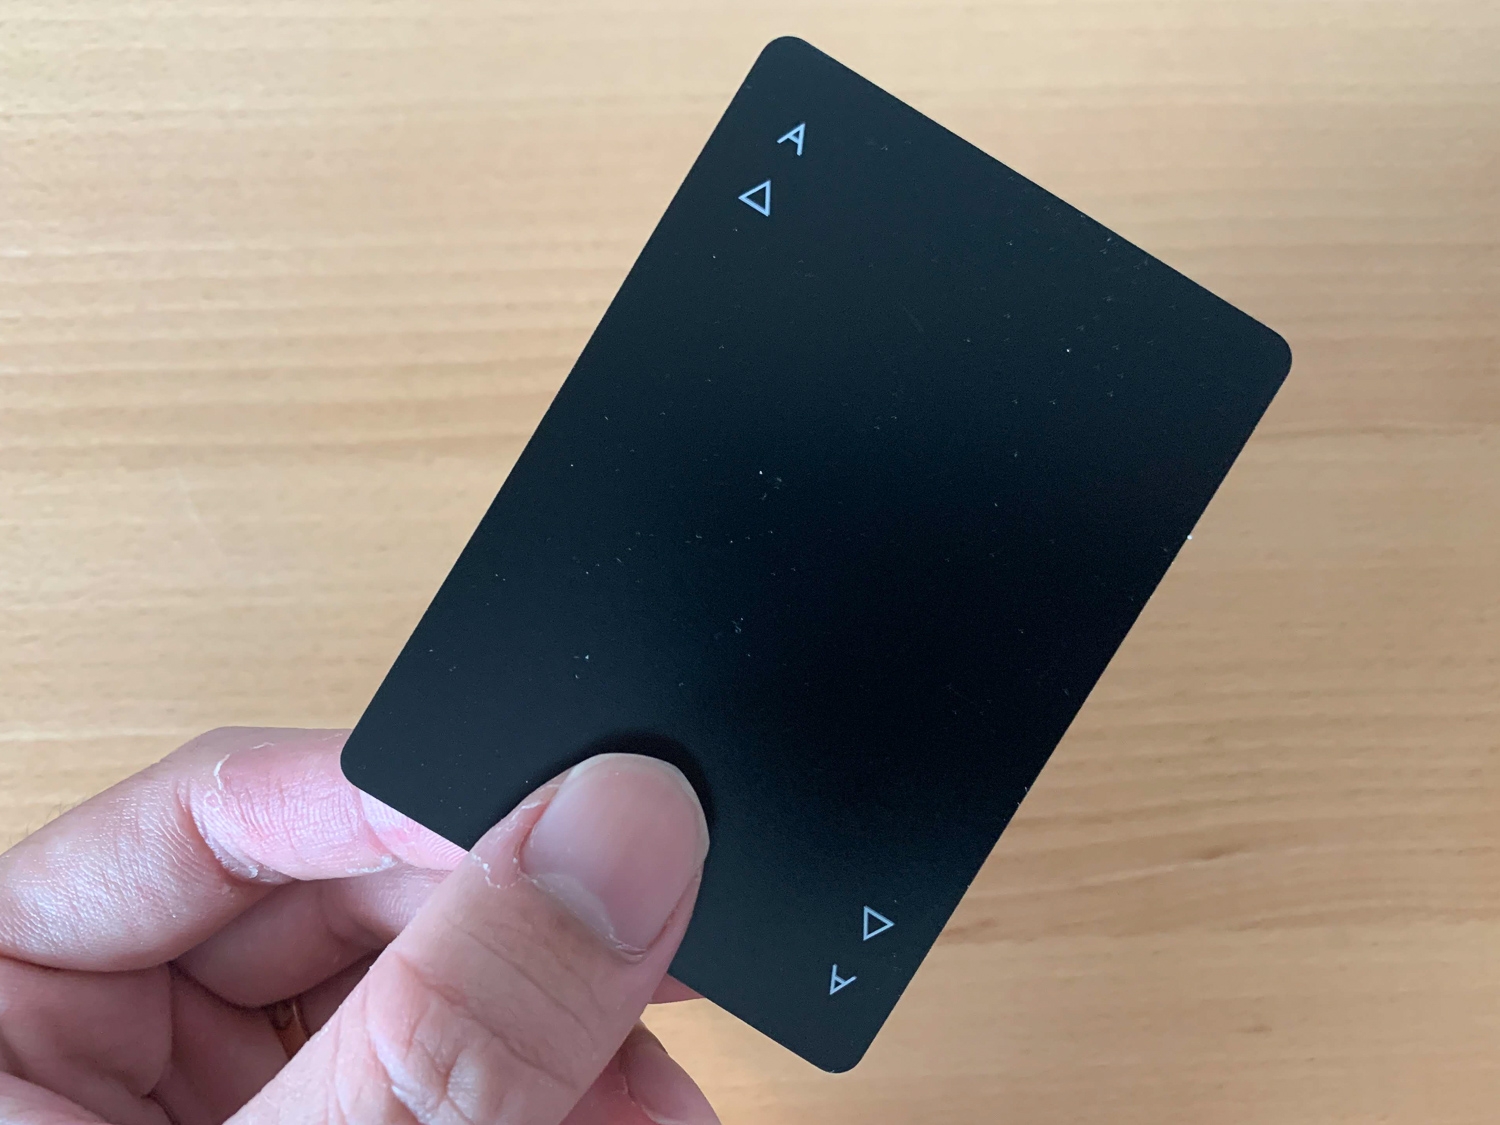 These black playing cards are really... black.